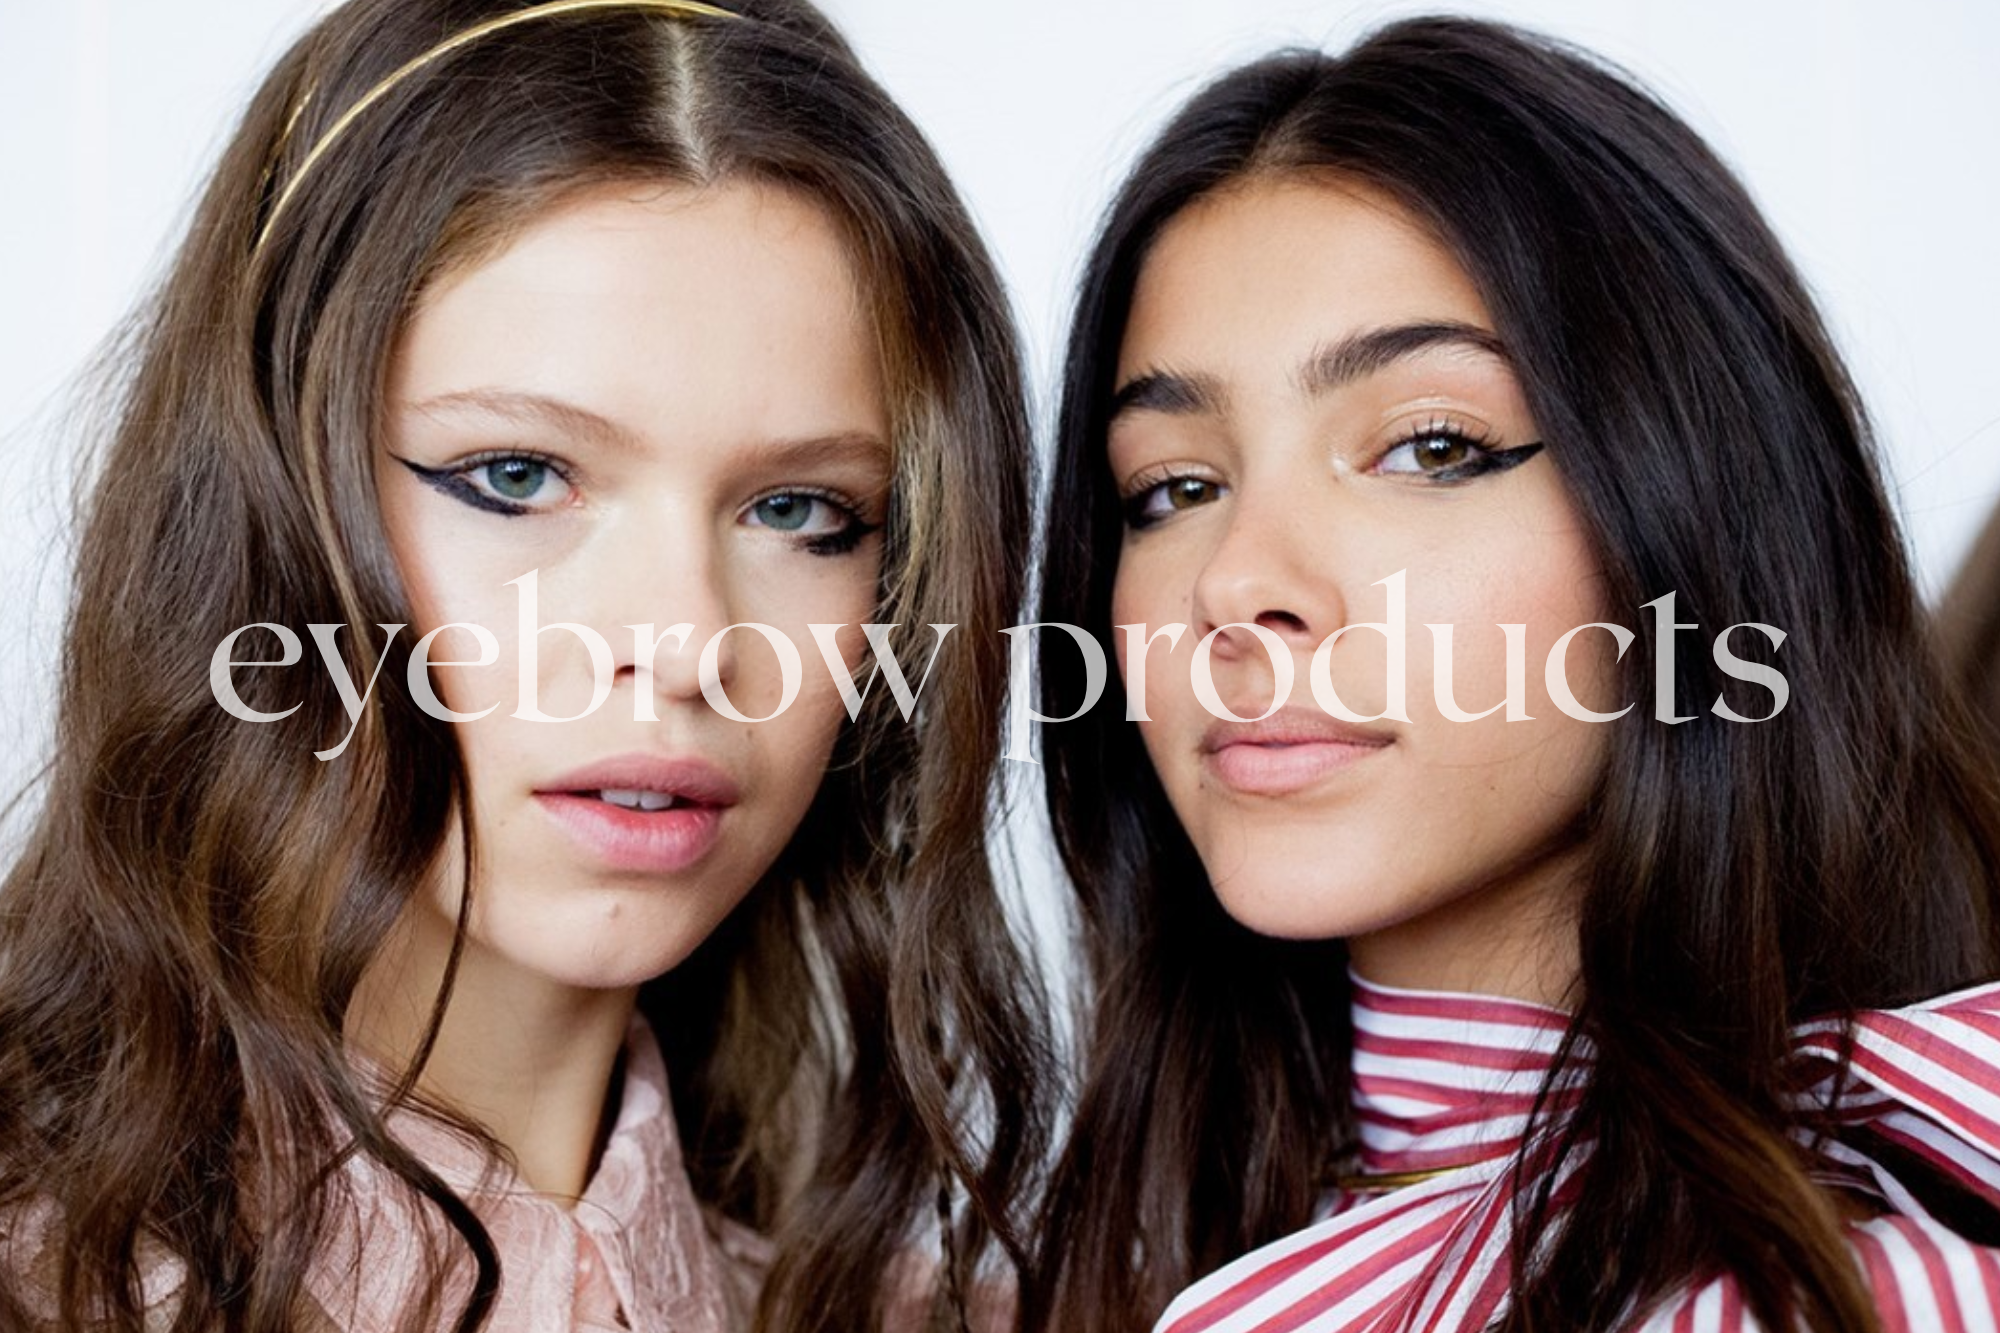 12 eyebrow products you didn’t know you needed